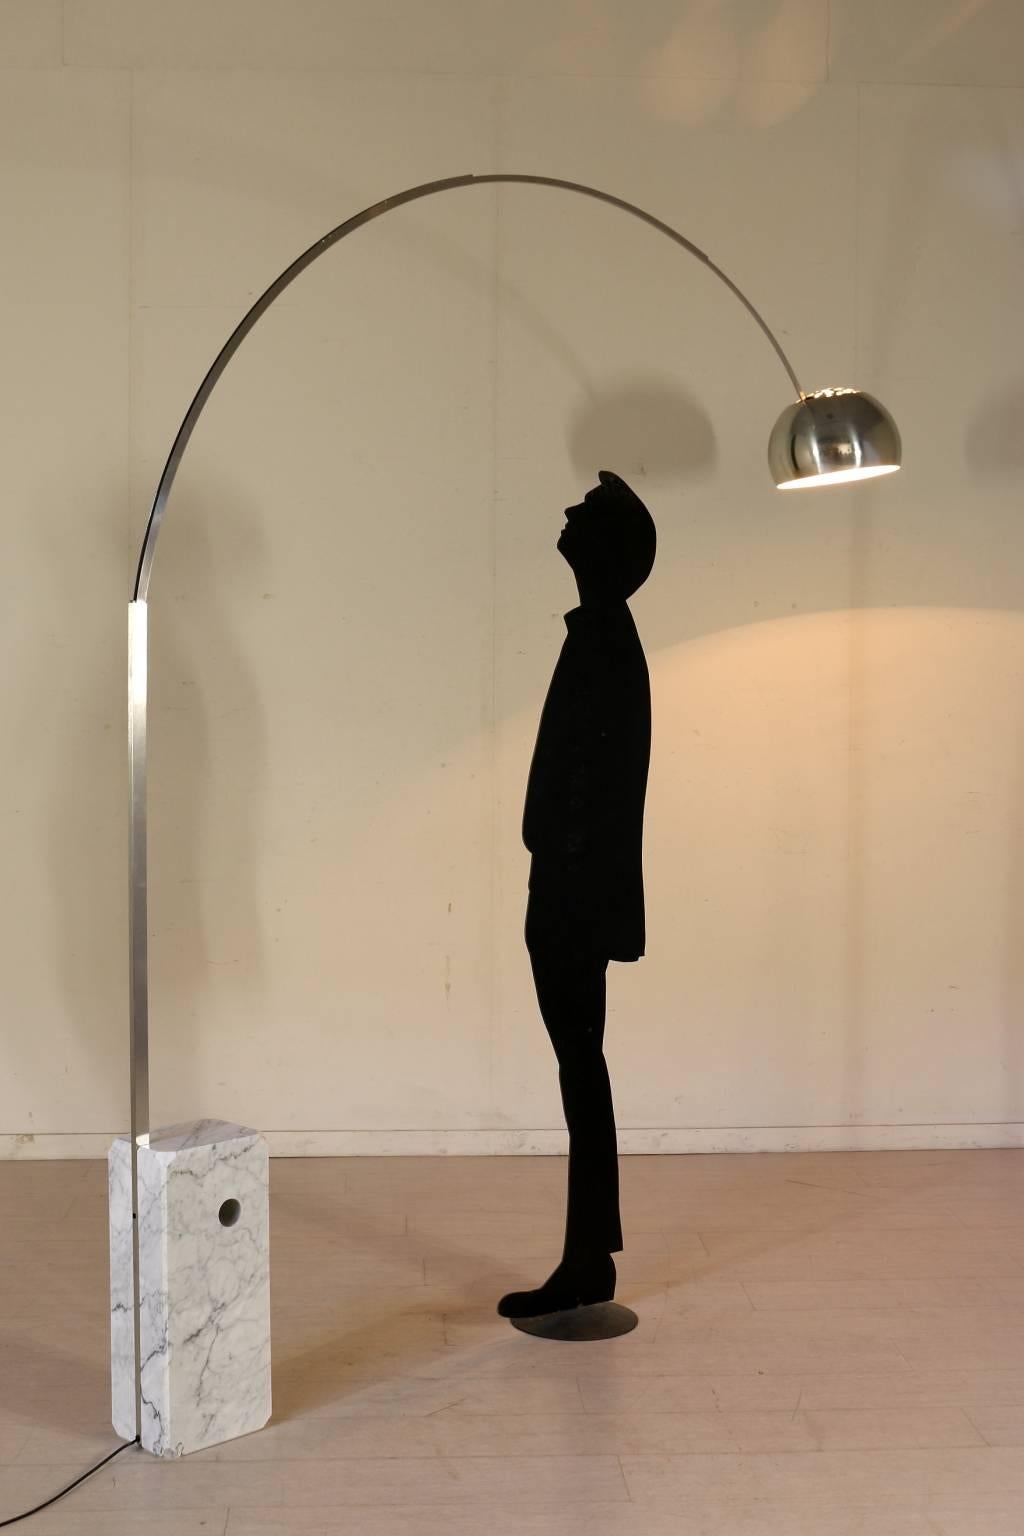 'Arco' floor lamp designed by Achille and Pier Giacomo Castiglioni in 1962, manufactured in Italy by Flos in the 1980s. Marble basement, steel.